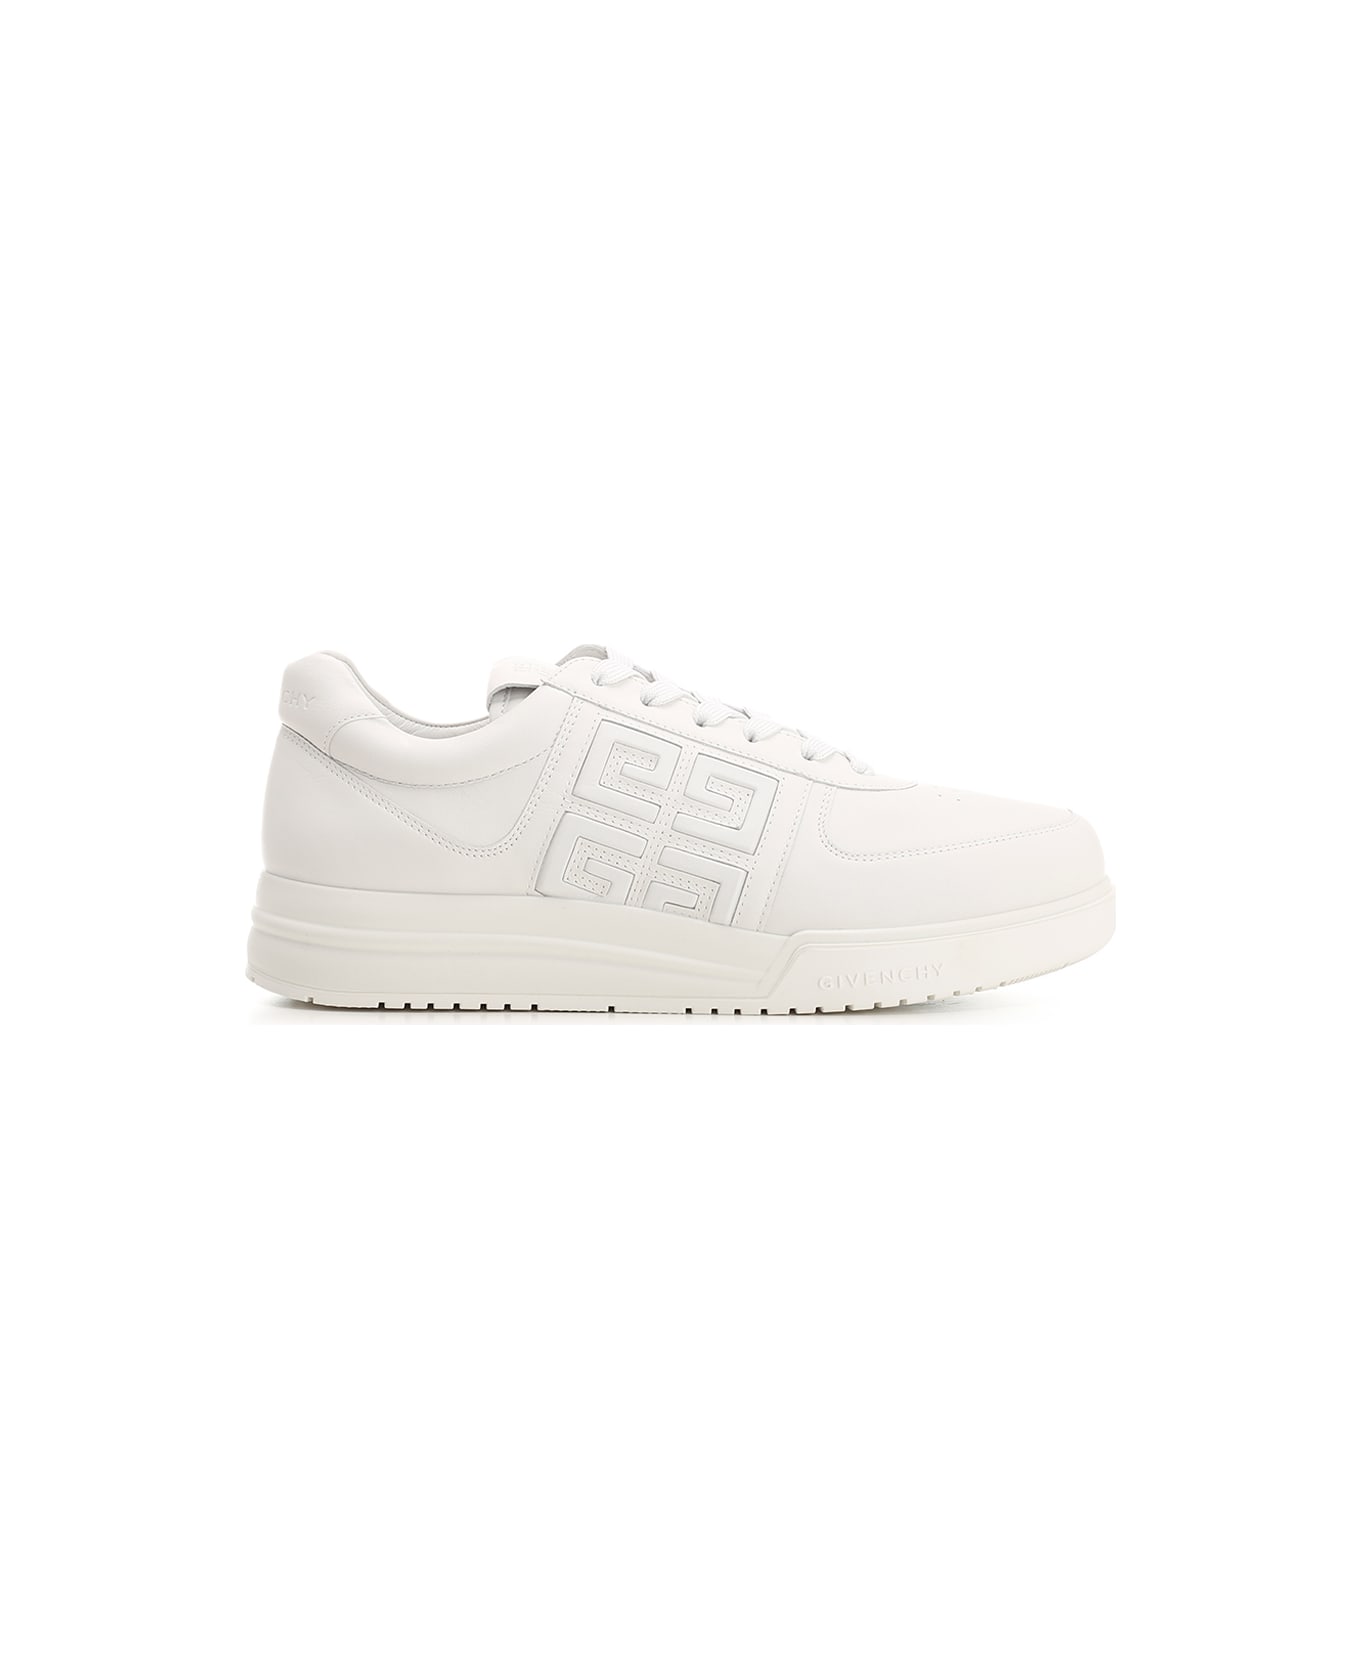 Givenchy 'g4' Low Sneaker - White